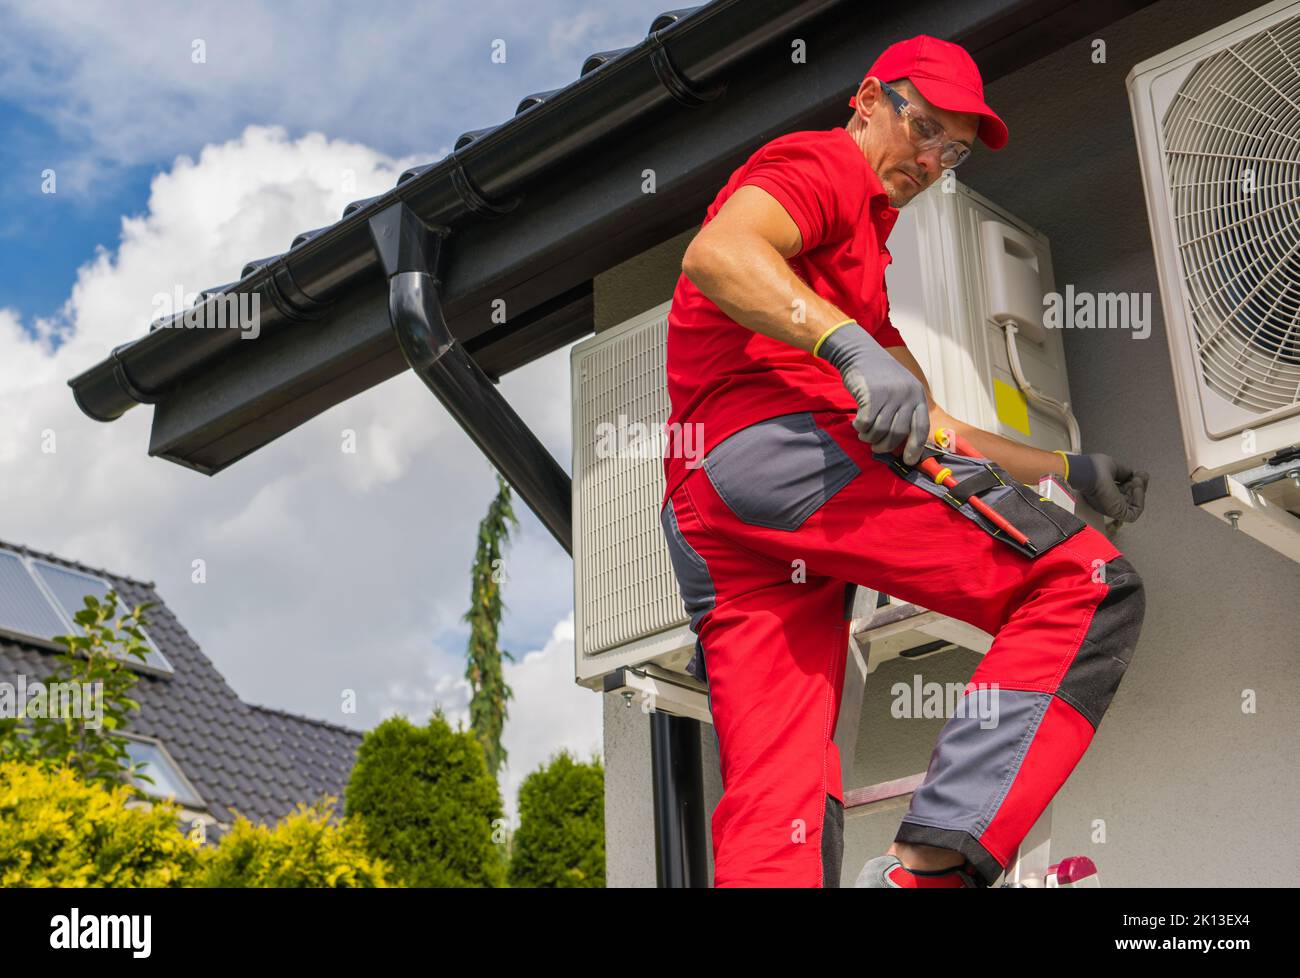 Modern Home Heating Technologies. Professional Caucasian HVAC Worker in His 40s Maintain Heat Pump Repair From a Ladder. Stock Photo